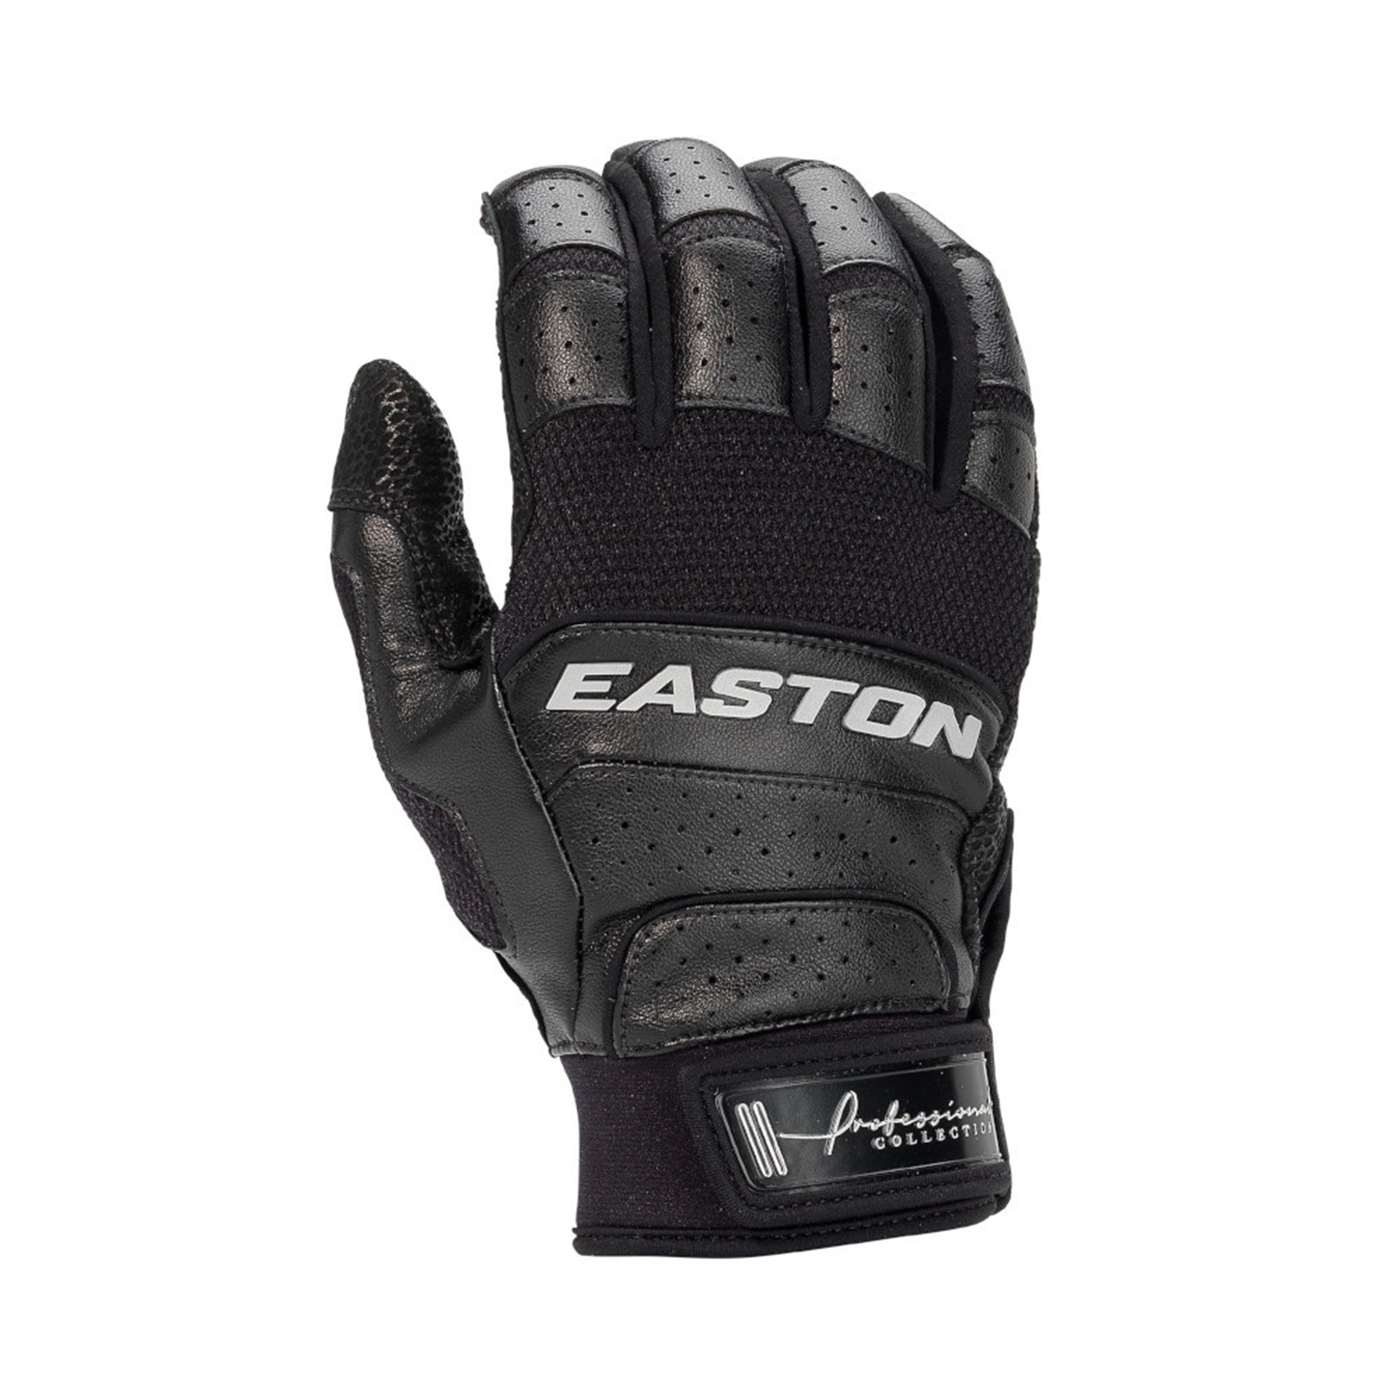 Easton Pro Collection Batting Gloves